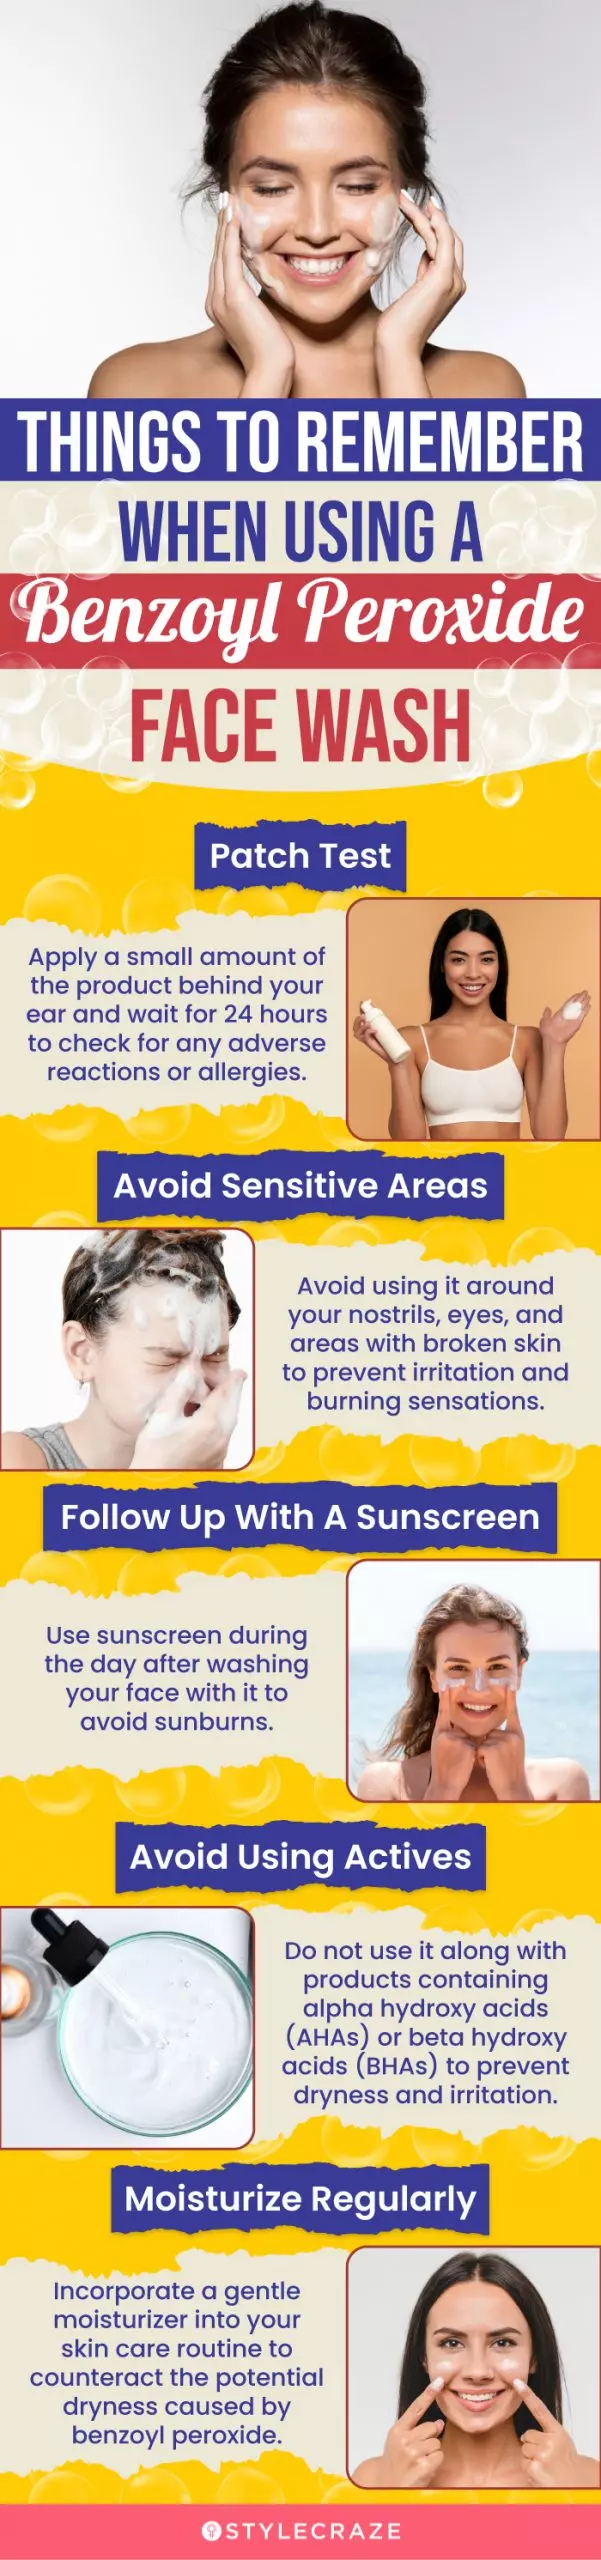 Things To Remember When Using A Benzoyl Peroxide Face Wash (infographic)